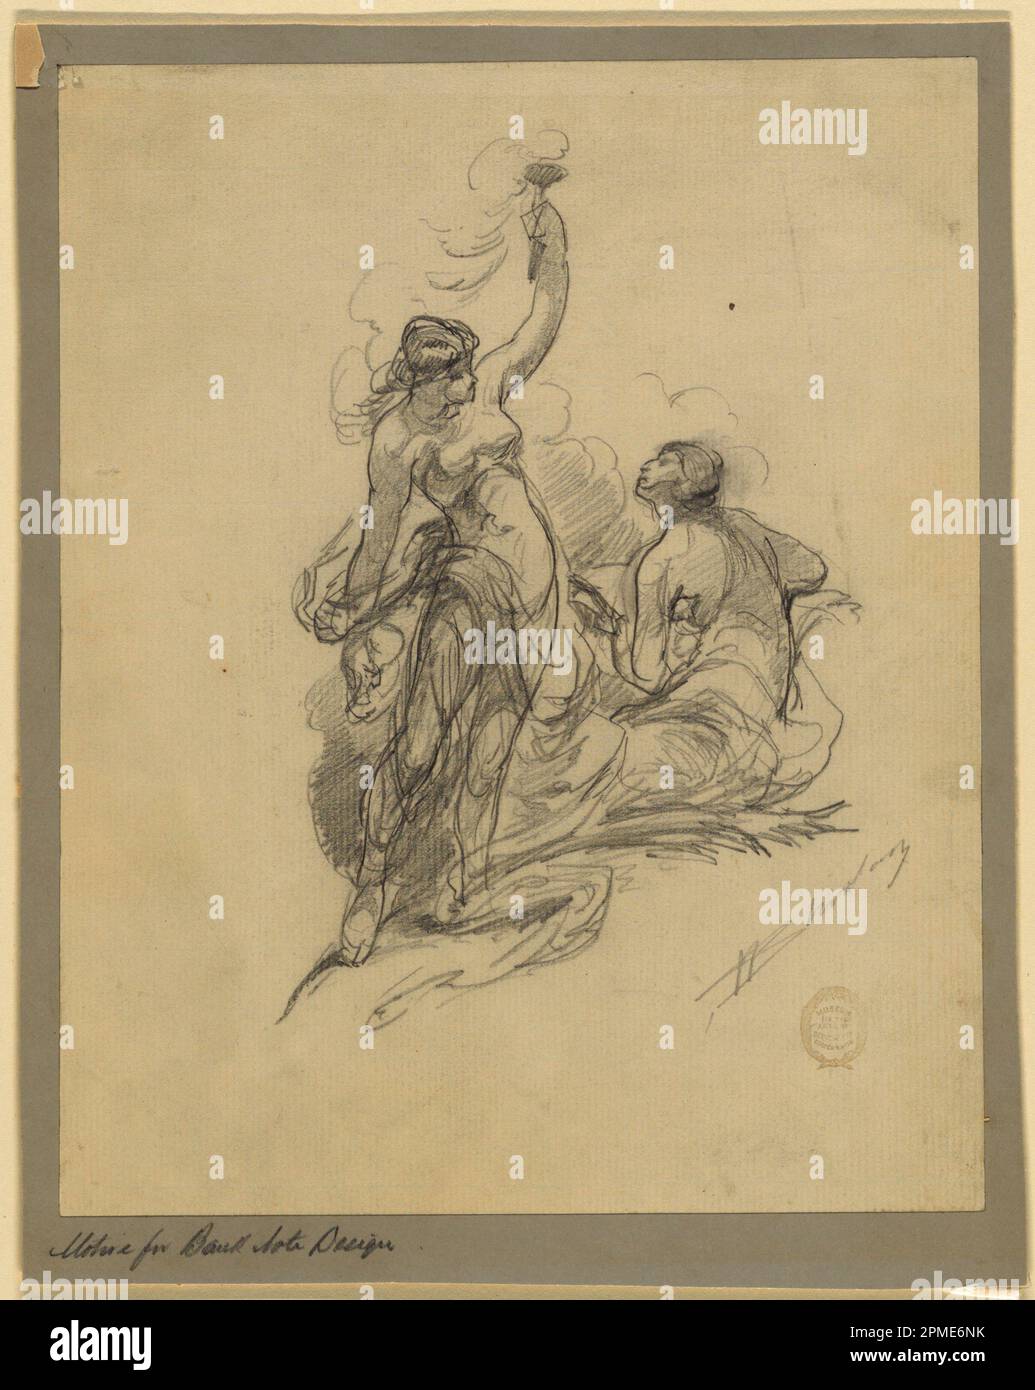 Drawing, Motif for Bank Note Design; Walter Shirlaw (American, b. Scotland, 1838–1909); USA; graphite on cream wove paper; 25.4 × 20.3 cm (10 × 8 in.) Mount: 28 × 22.2 cm (11 × 8 3/4 in.) Stock Photo